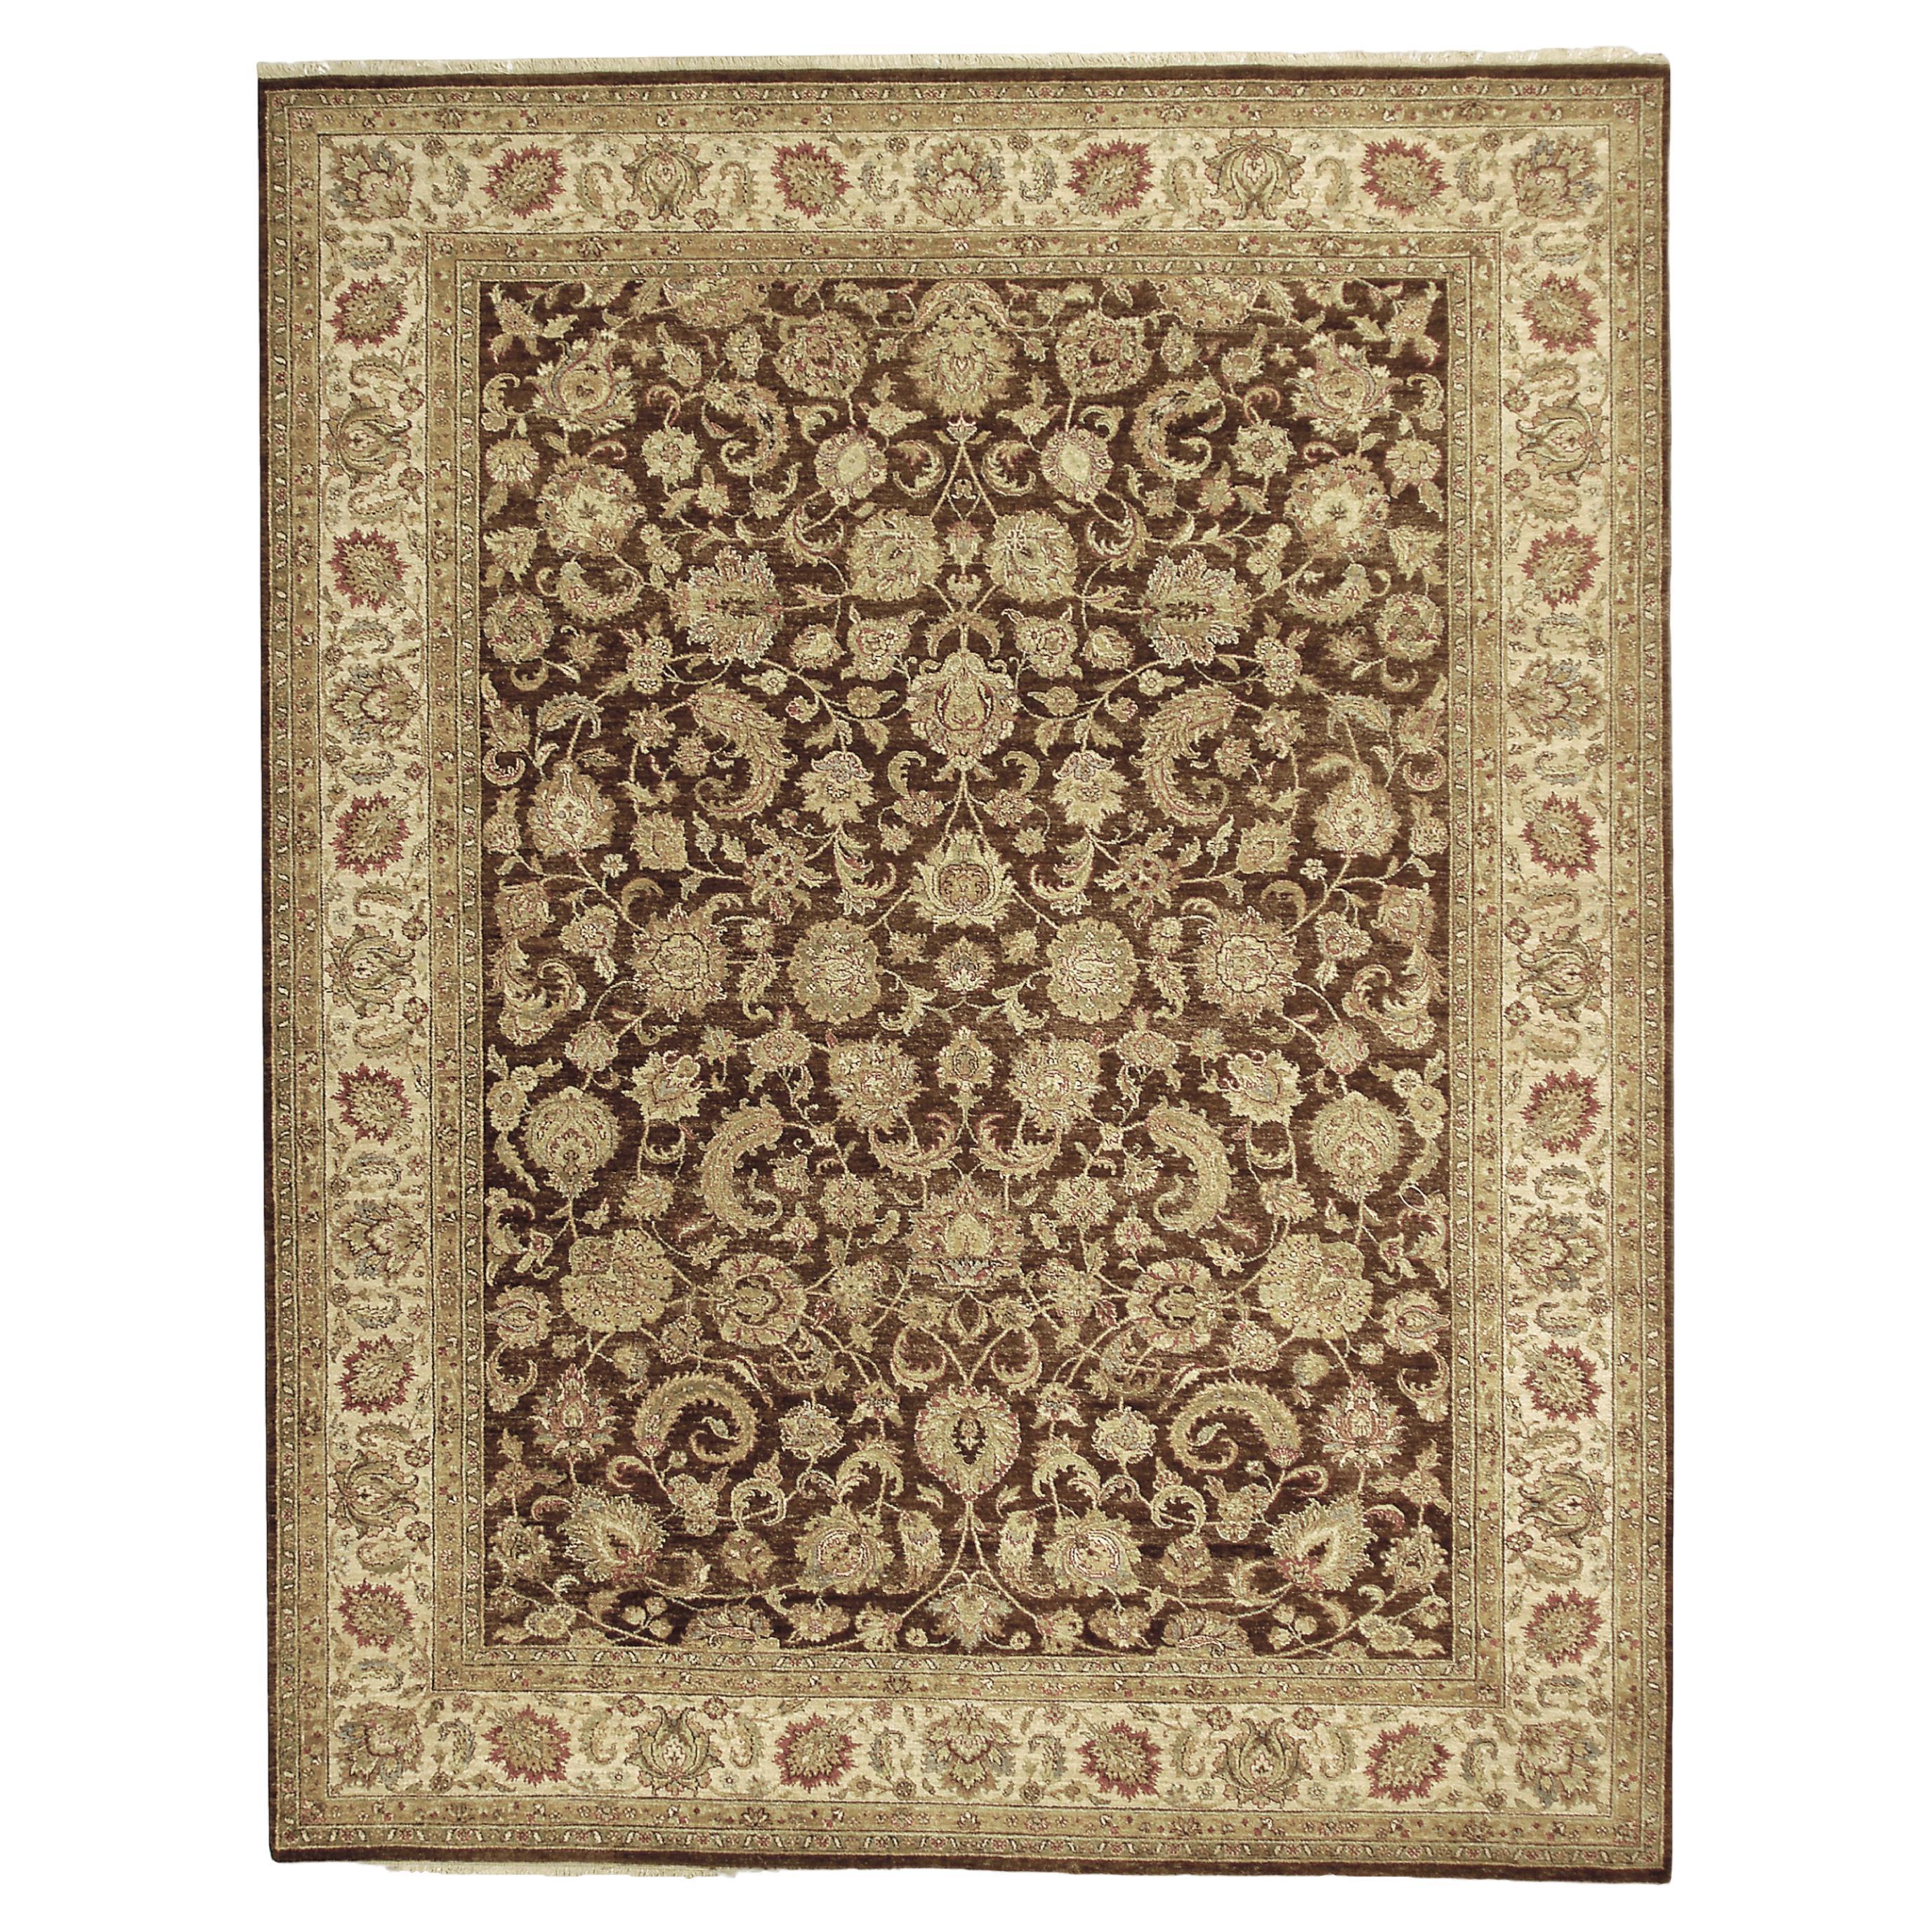 Luxury Traditional Hand-Knotted Brown/Cream 12x15 Rug